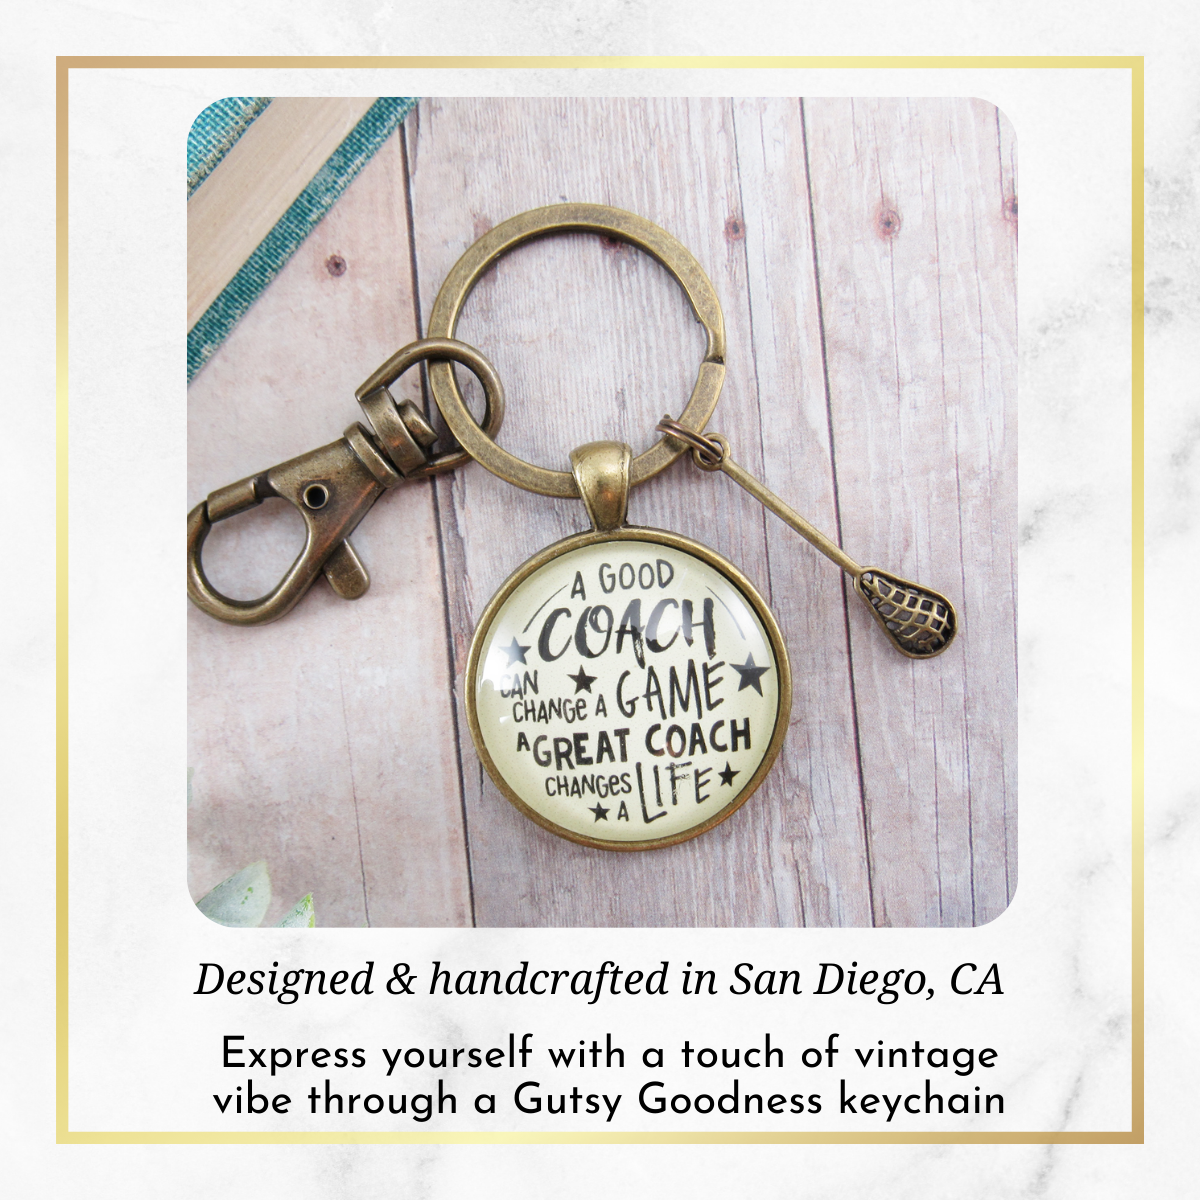 Lacrosse Coaching Sport Keychain Great Coach Changes Life Thank You Gift - Gutsy Goodness Handmade Jewelry;Lacrosse Coaching Sport Keychain Great Coach Changes Life Thank You Gift - Gutsy Goodness Handmade Jewelry Gifts